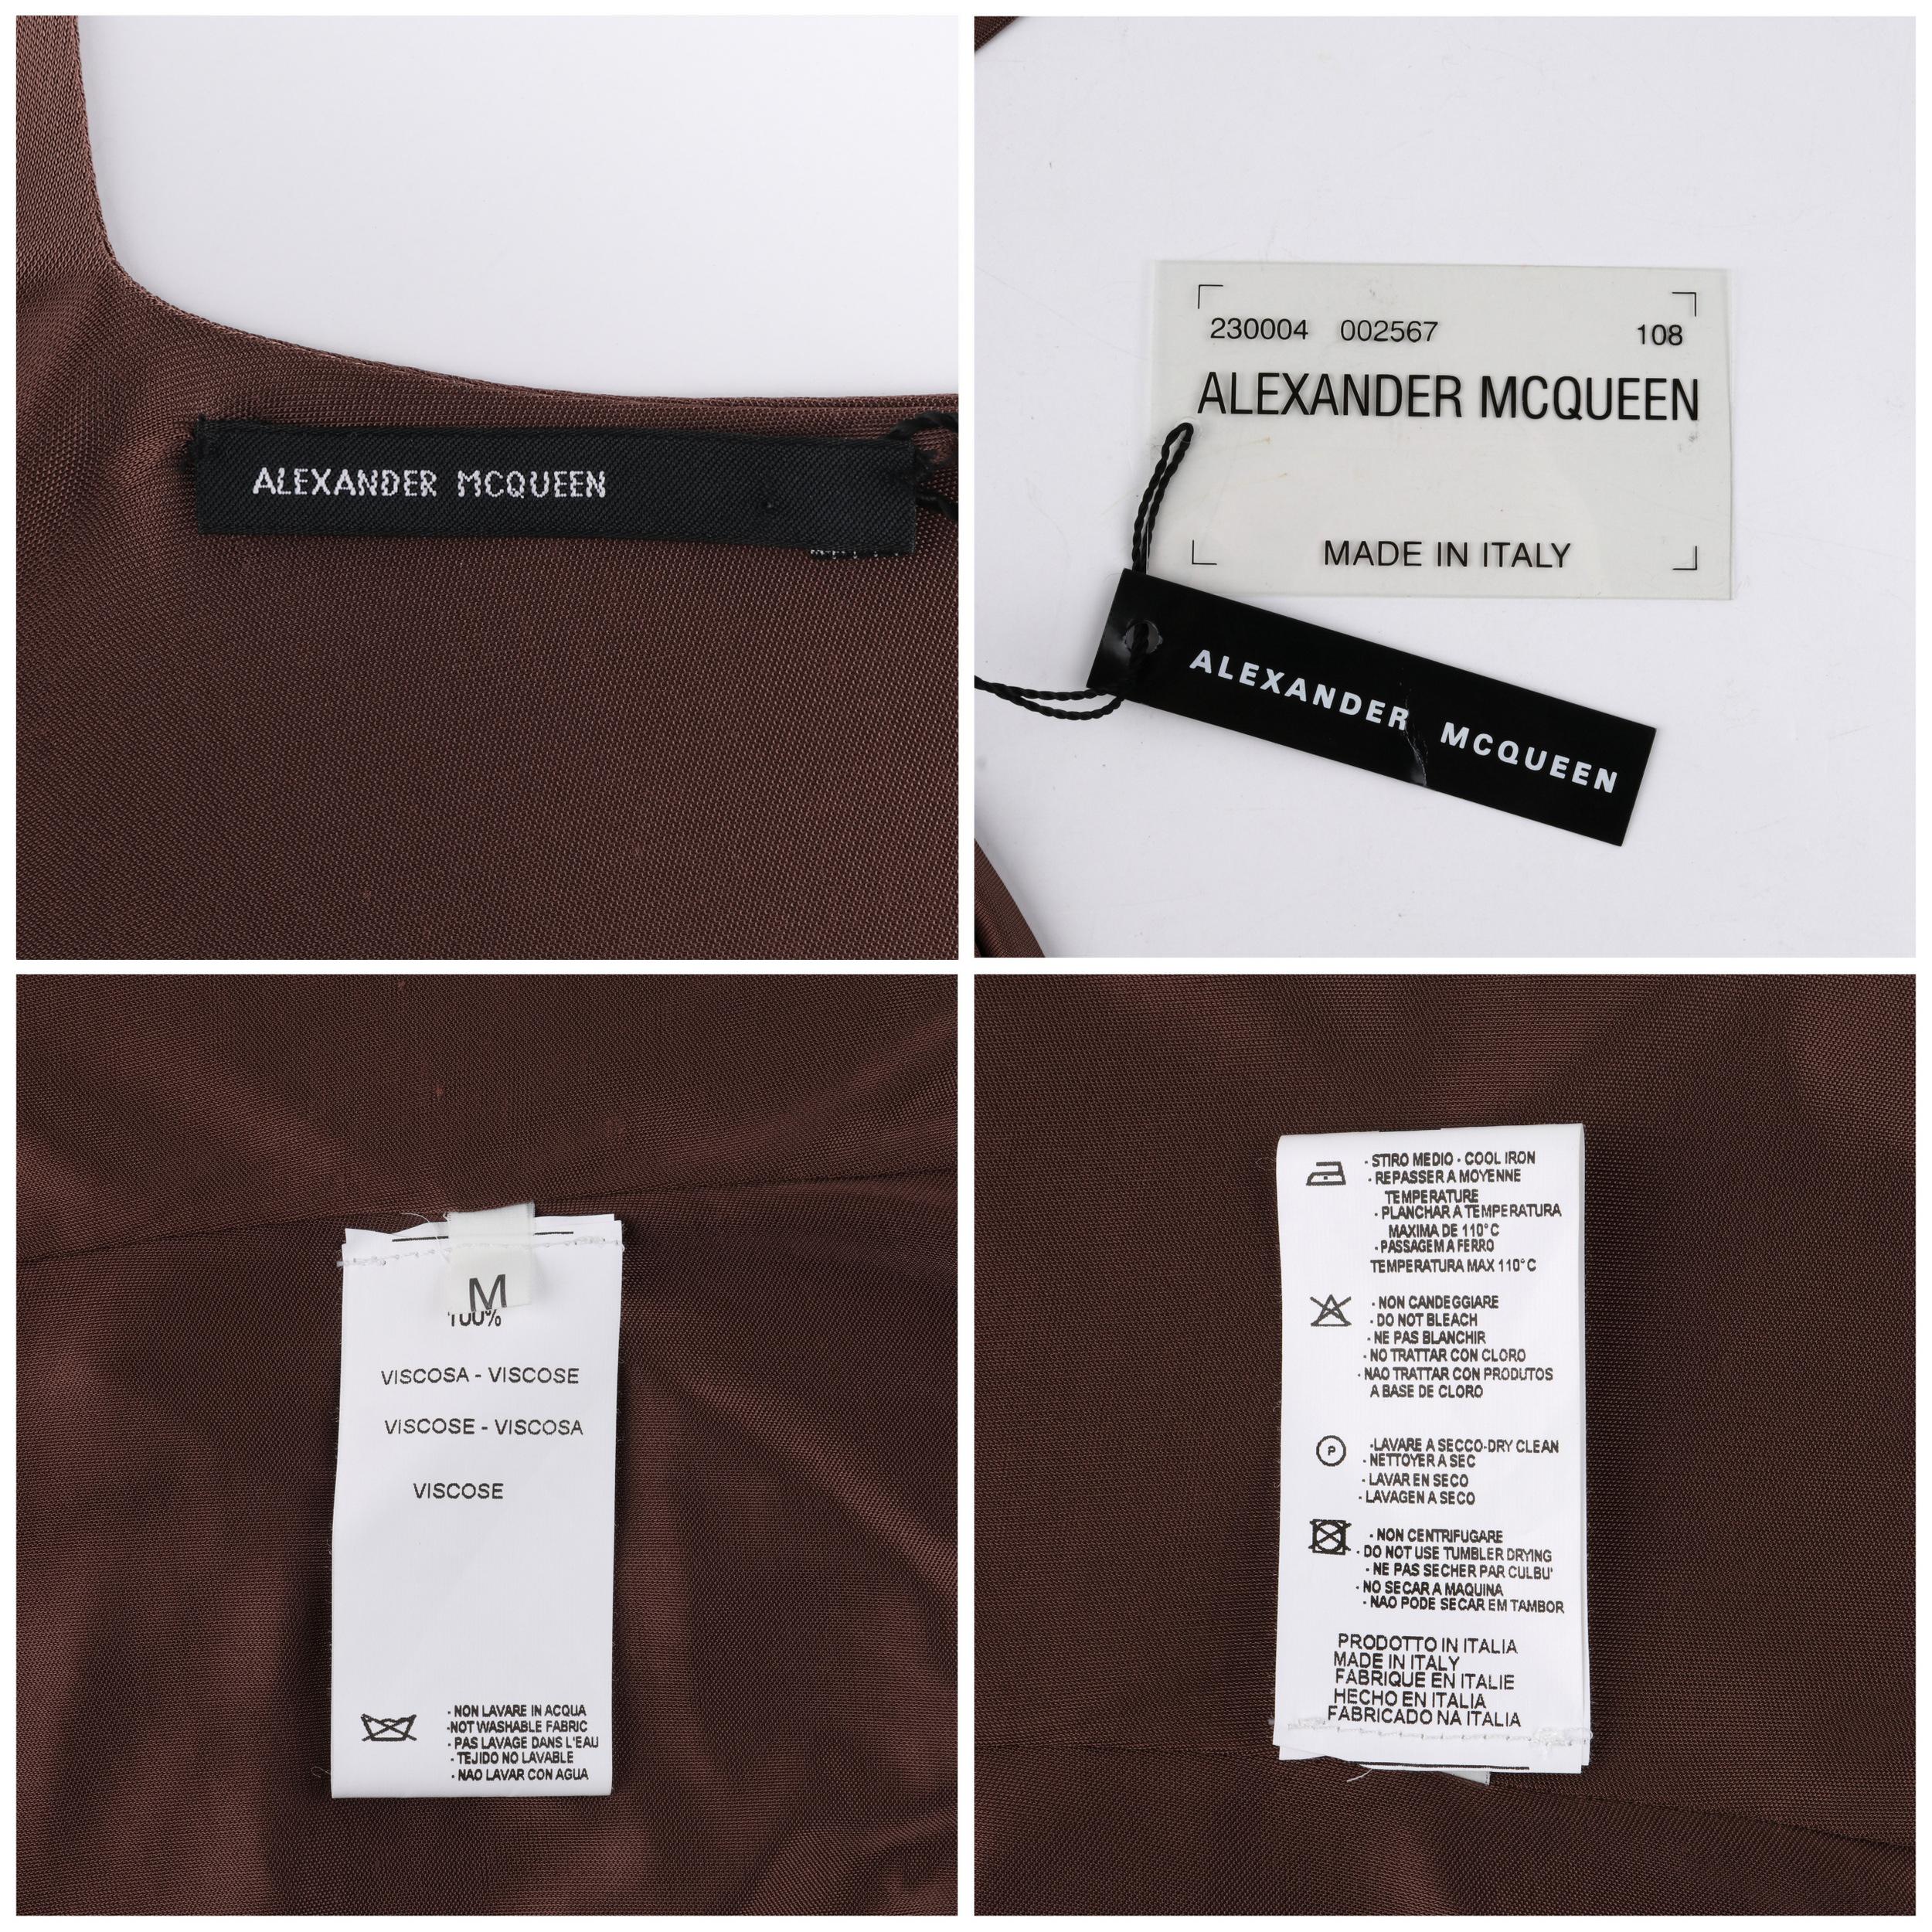 ALEXANDER McQUEEN S/S 1996 Brown Plunging Keyhole Neck Bodycon Midi Dress For Sale 2